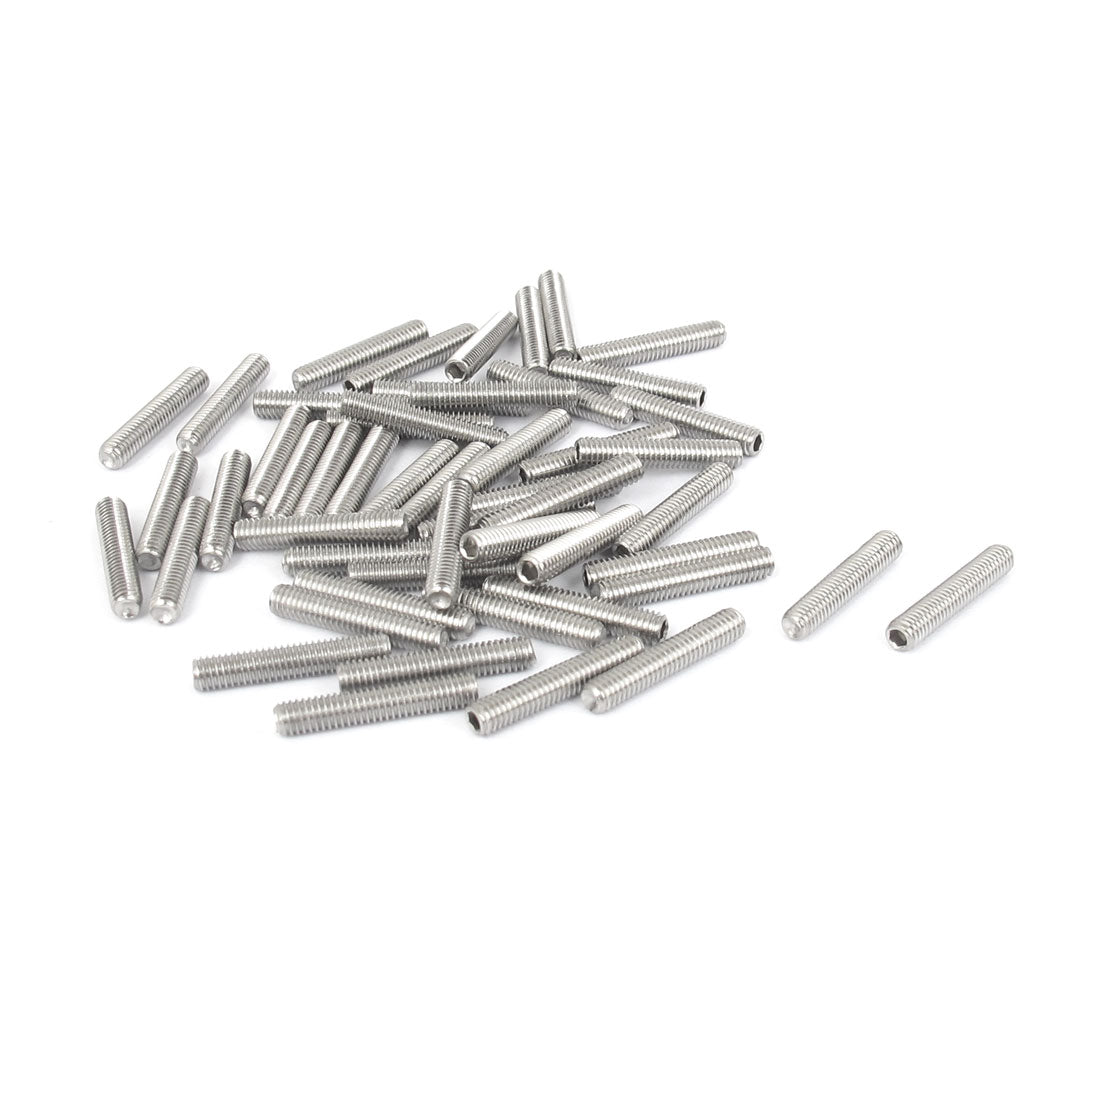 uxcell Uxcell M3x16mm Stainless Steel Hex Socket Set Cup Point Grub Screws Silver Tone 50pcs